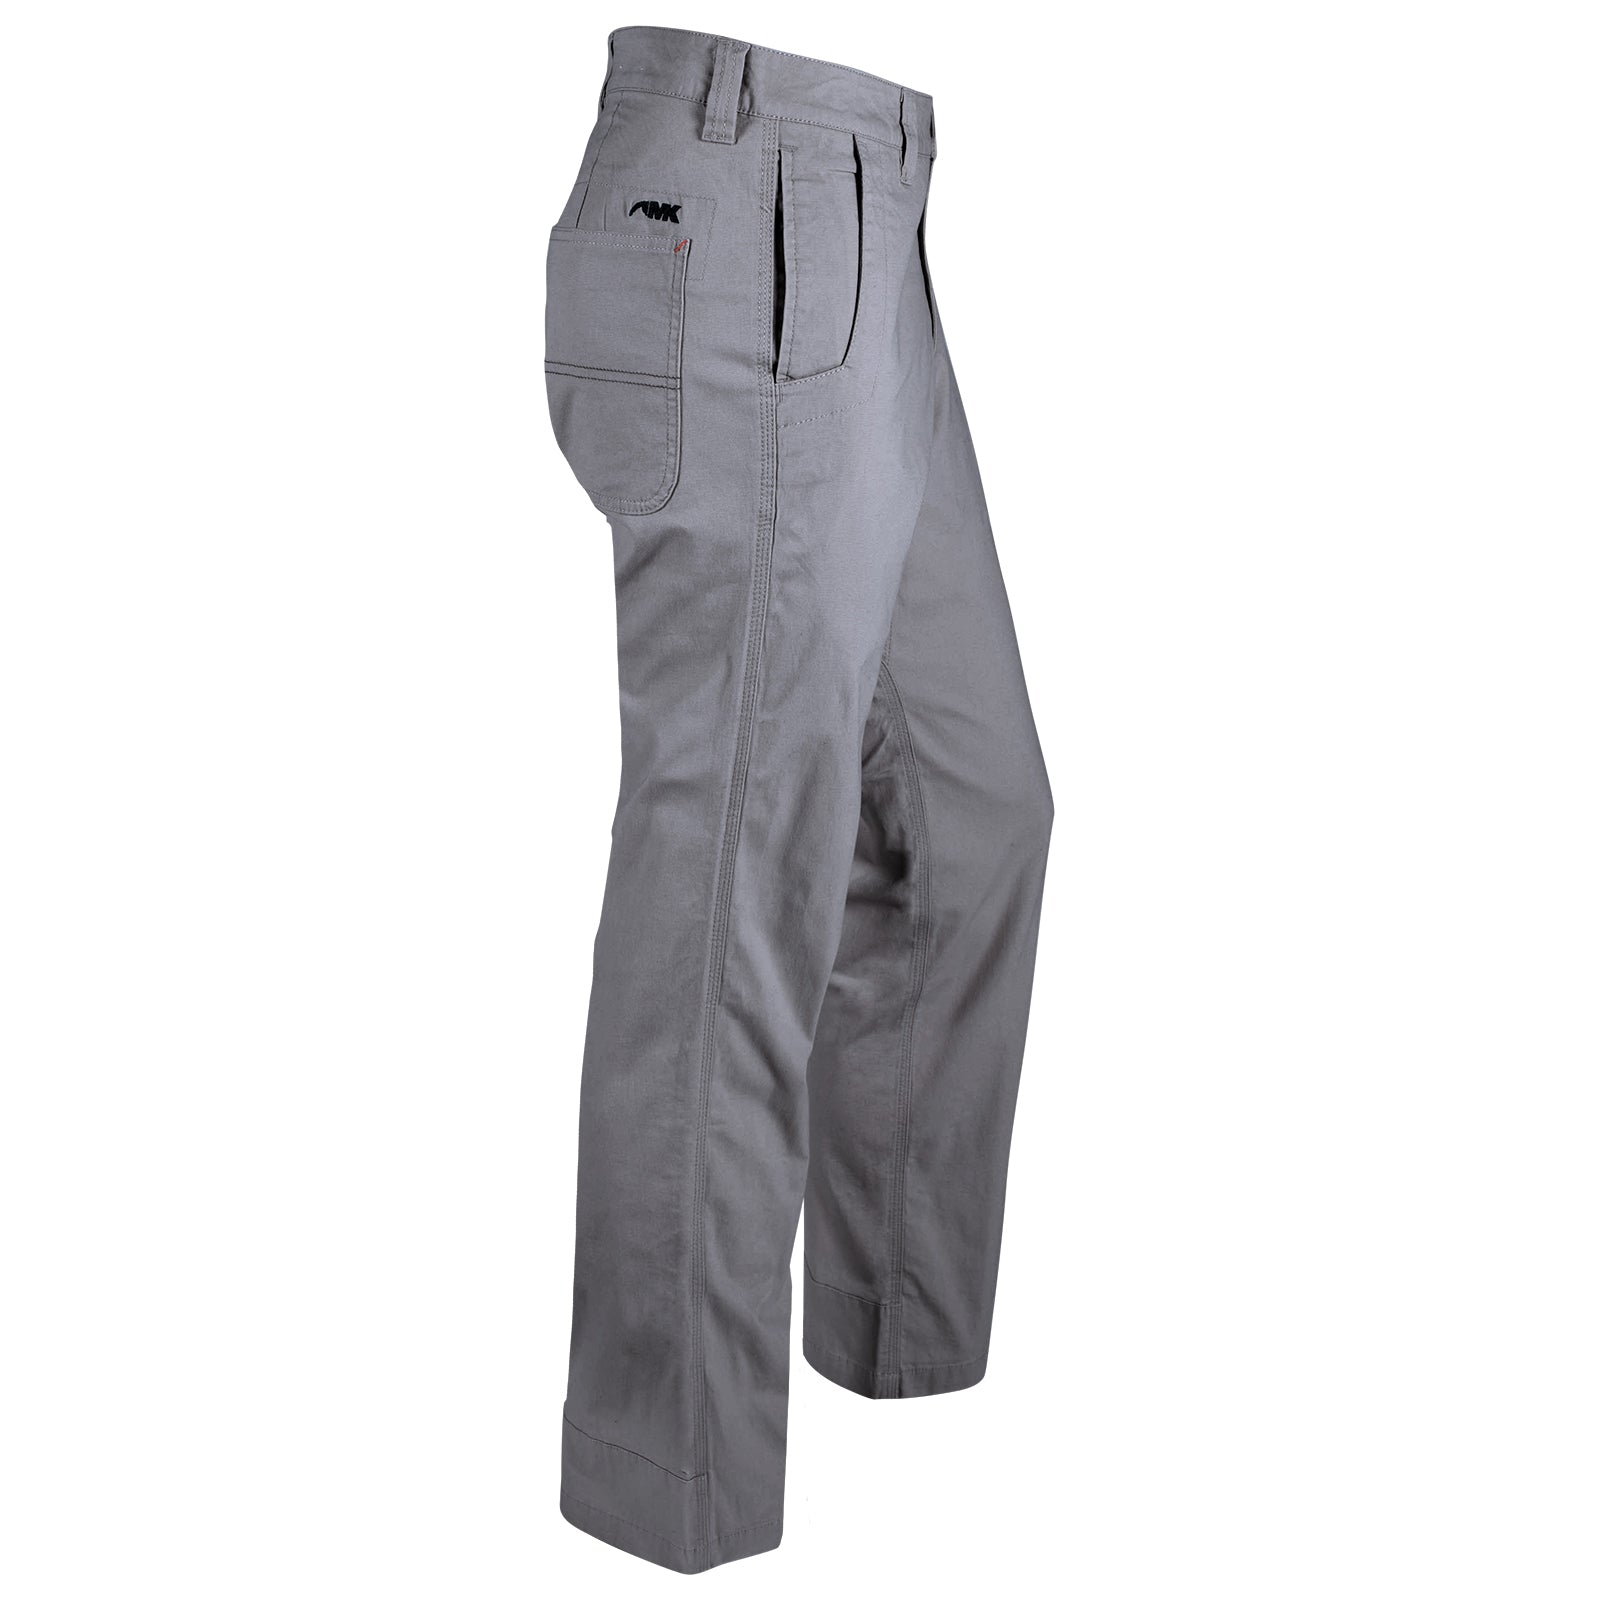 PANT ROCK LIGHT PERF COTTON Work trousers - Diadora Utility Online Store IN